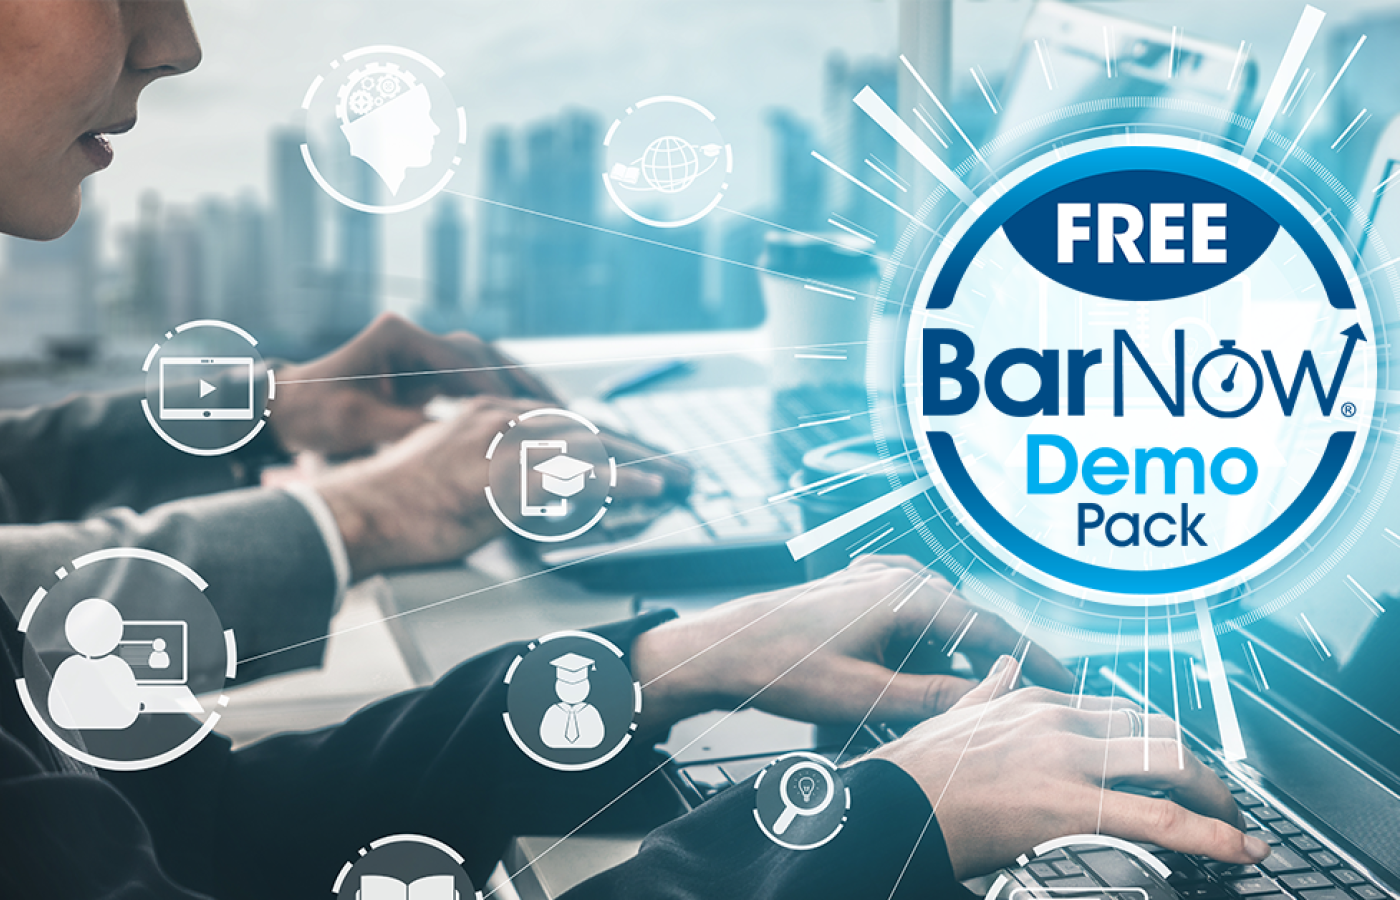 BarNow Demo Pack Image with logo